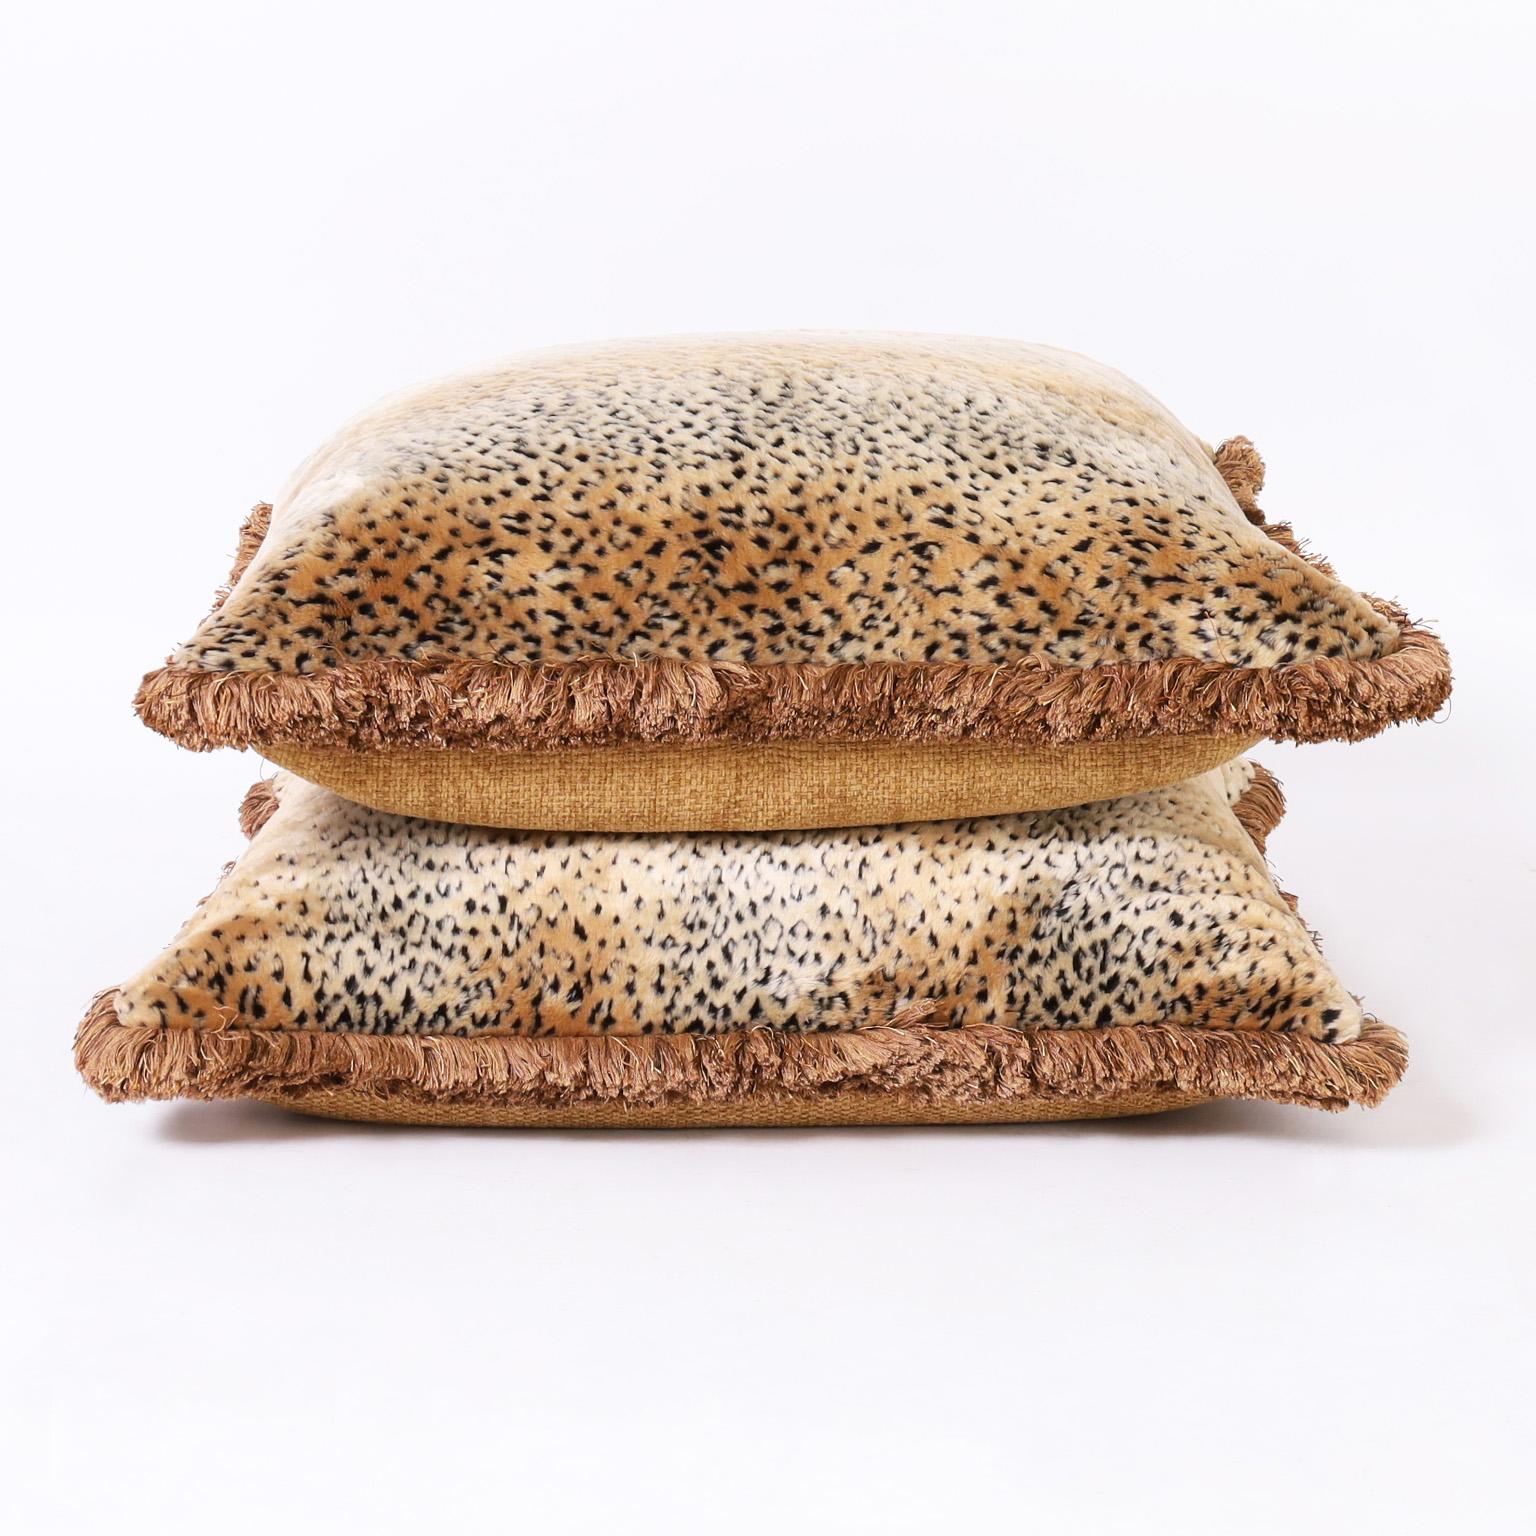 Hand-Crafted Custom Leopard Print Oversize Pillows, Priced Individually For Sale